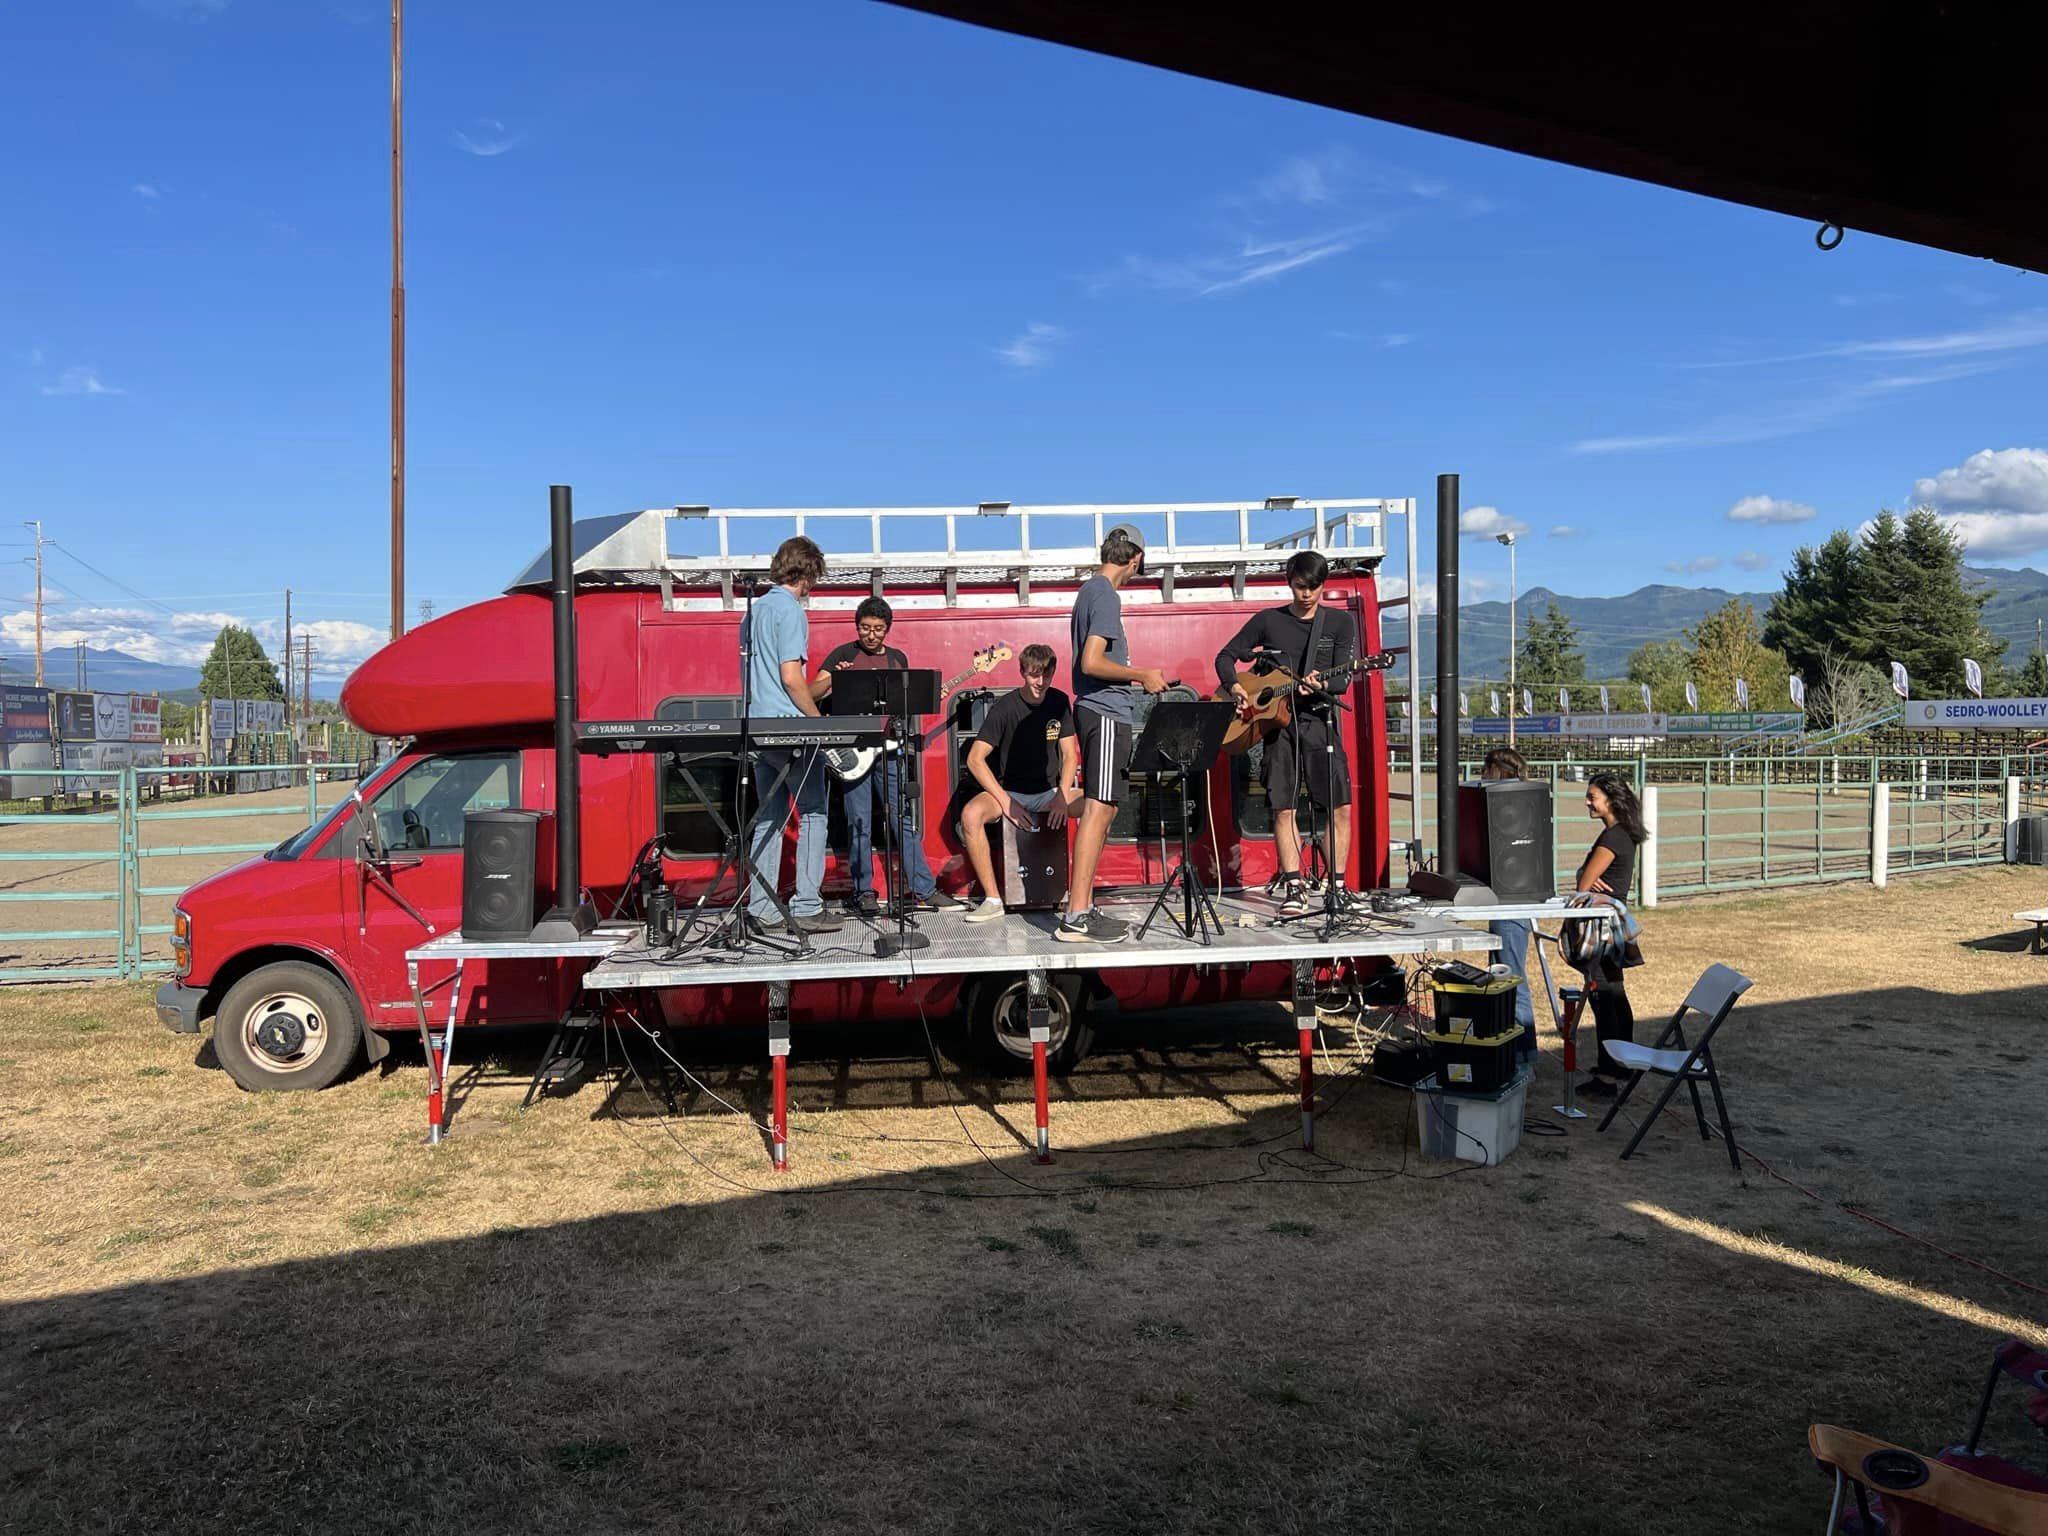 Show set up at the rodeo grounds in Skagit Valley, WA